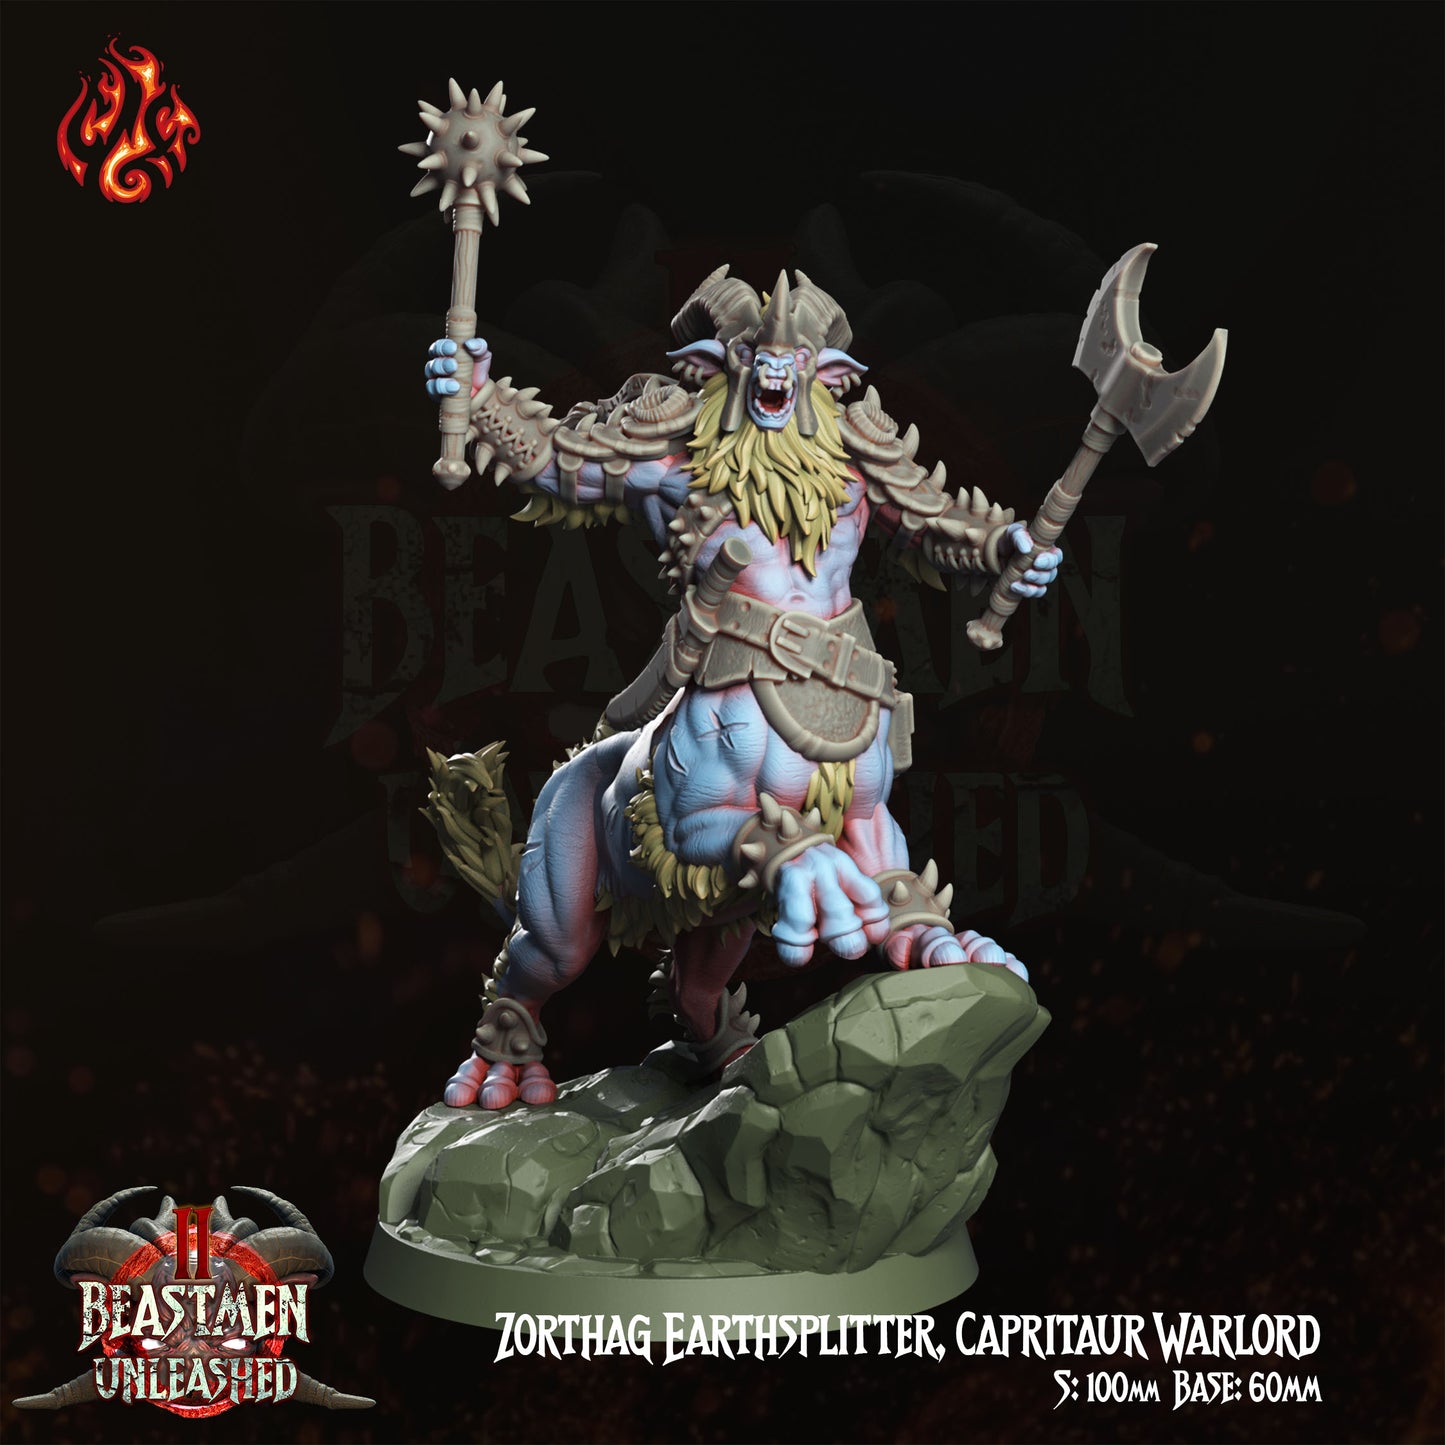 Zorthag Earthsplitter Capritaur Warlord - Beastmen Unleashed - from Crippled God Foundry - Table-top gaming mini and collectable for painting.